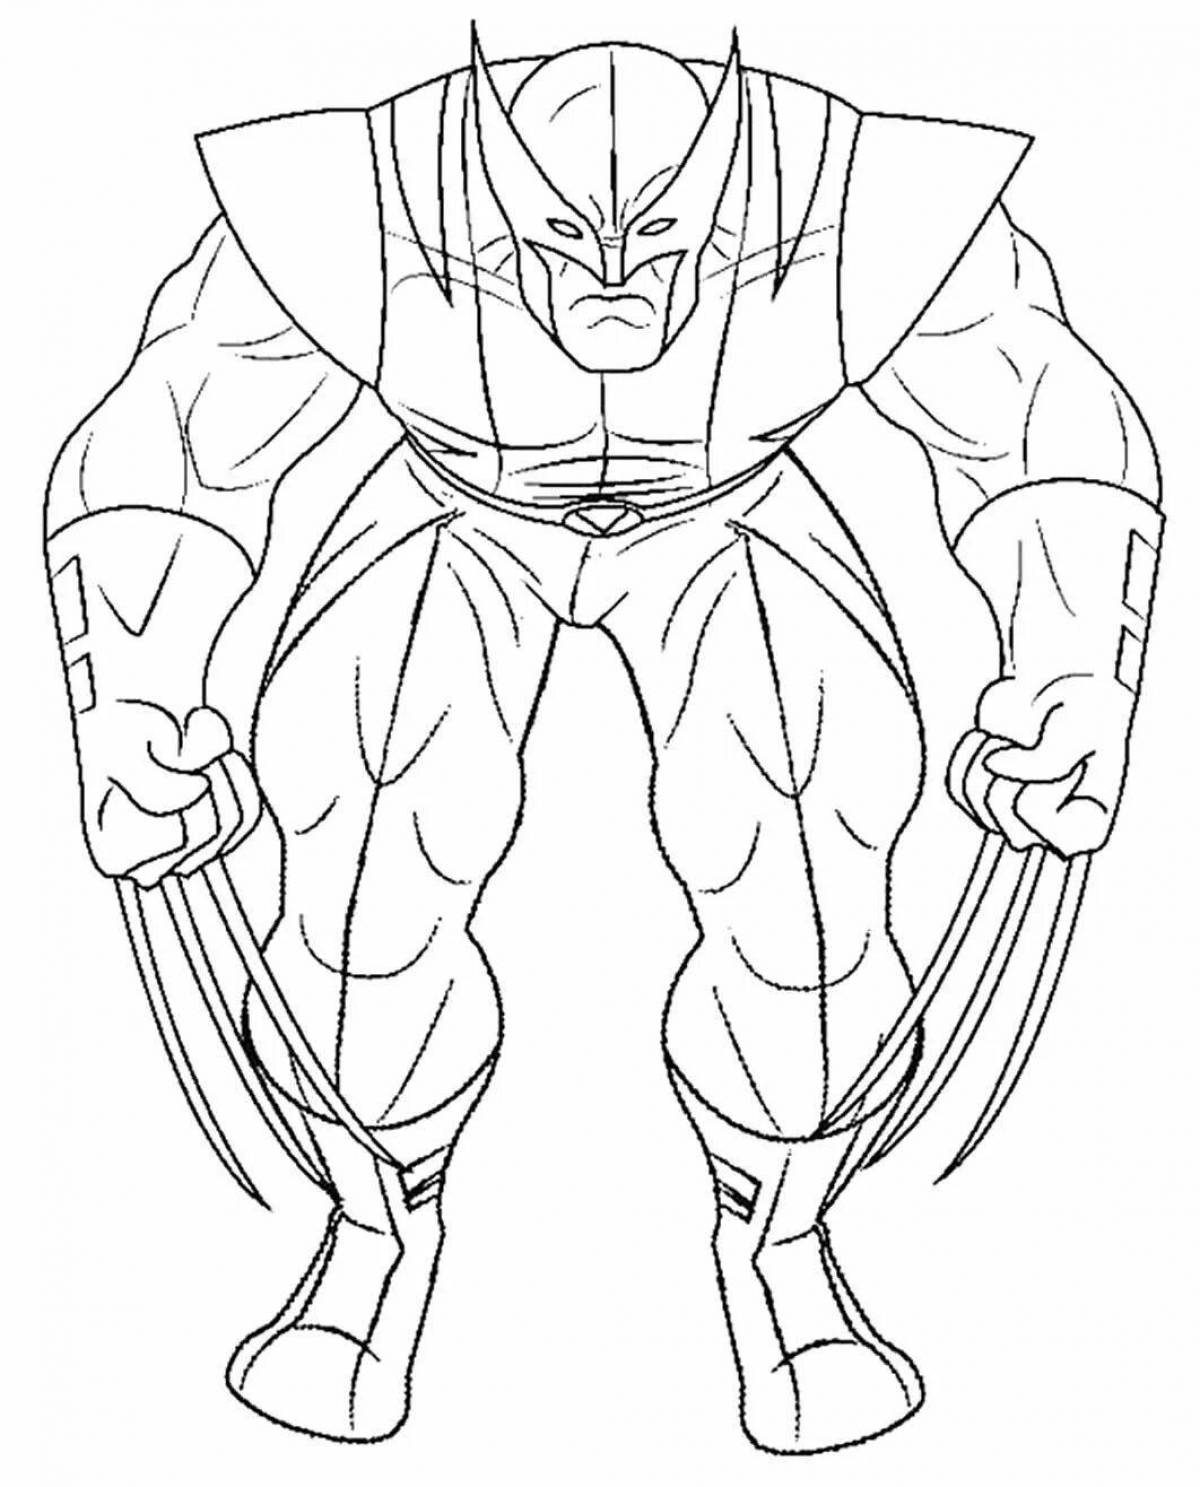 Marvel wolverine amazing coloring book